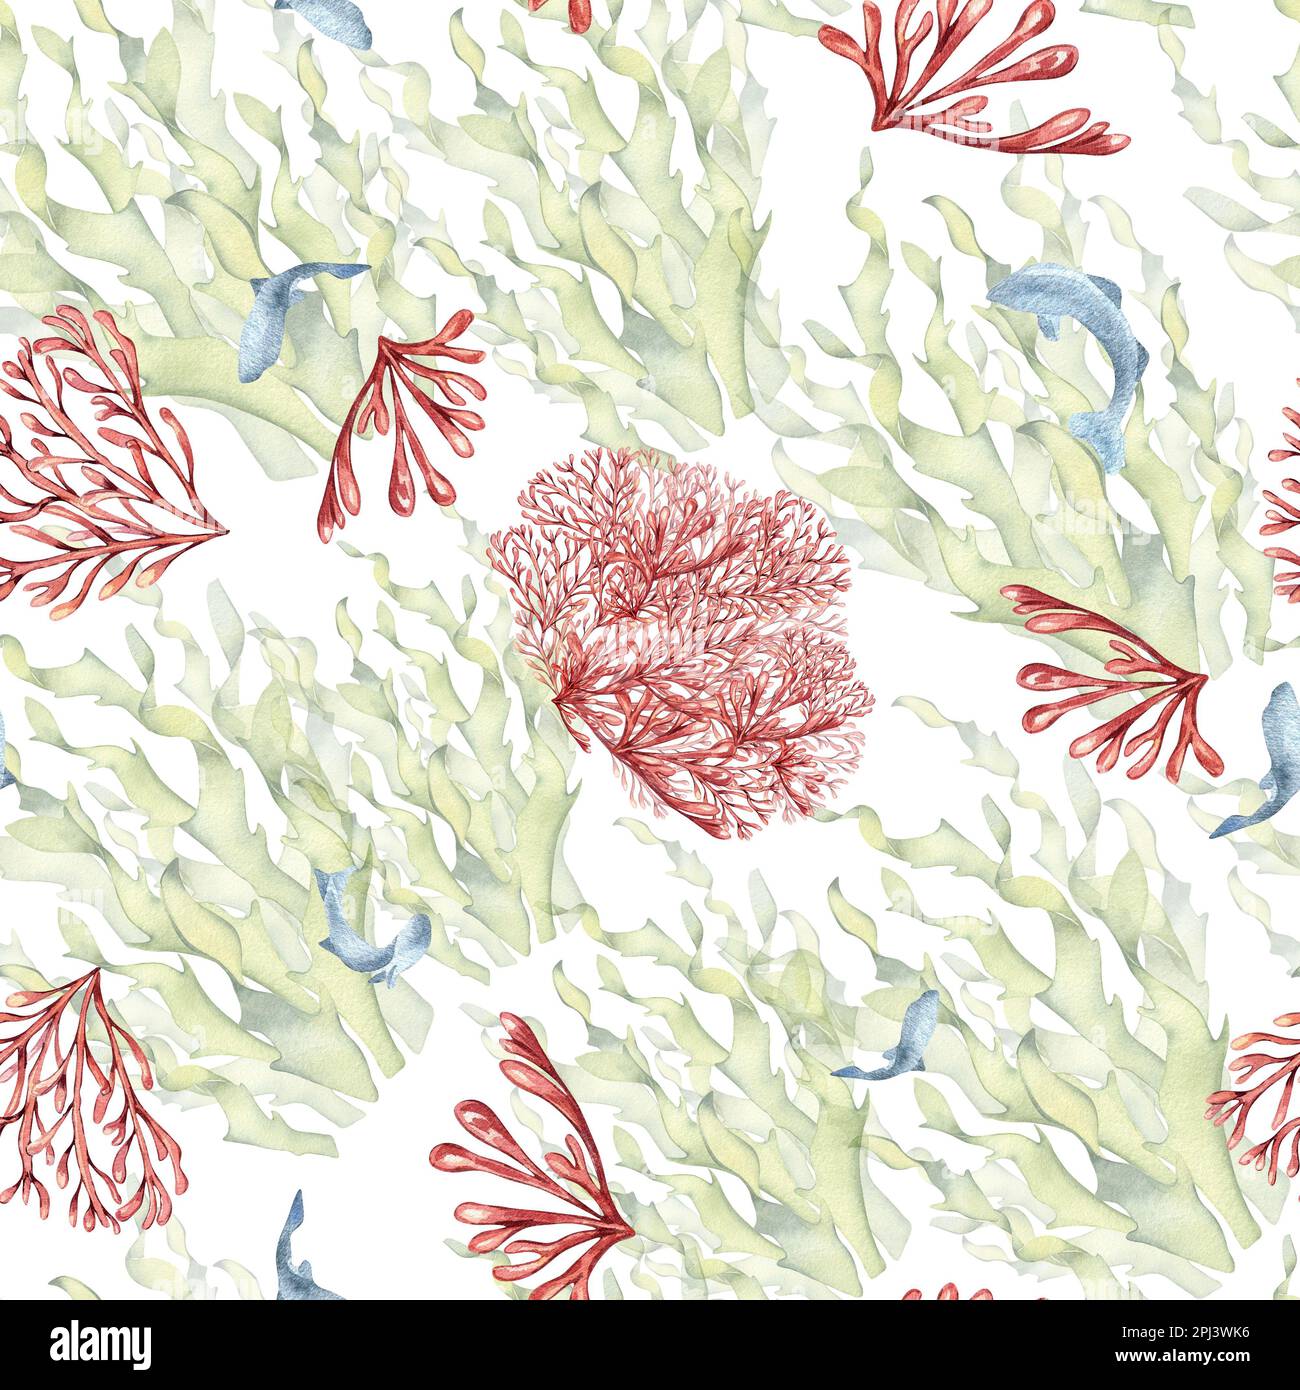 Seamless pattern of laminaria and coral watercolor isolated on white background. Pink agar agar, sea plants and fish hand drawn. Design element for pa Stock Photo